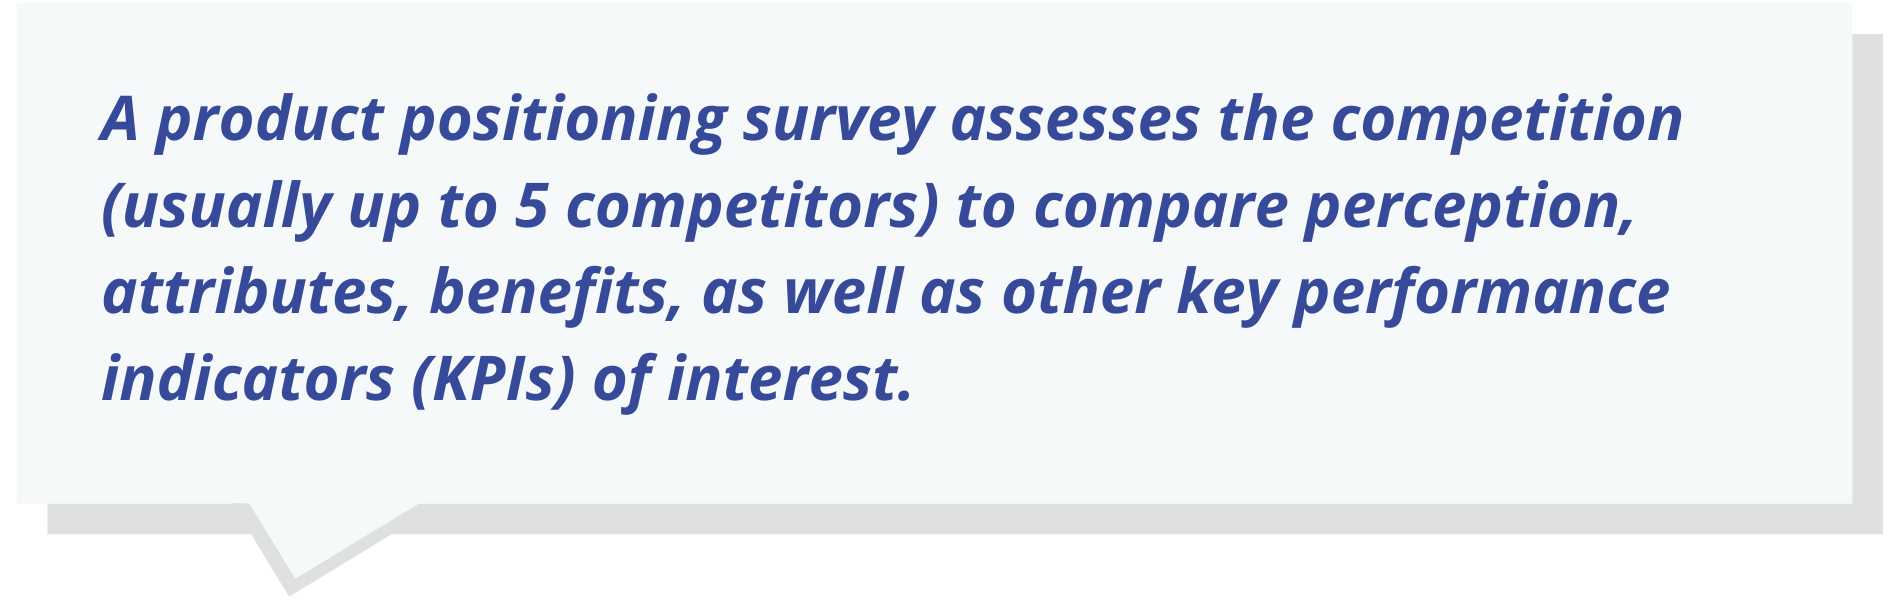 A product positioning survey assesses the competition (usually up to 5 competitors) to compare perception, attributes, benefits, as well as other key performance indicators (KPIs) of interest.